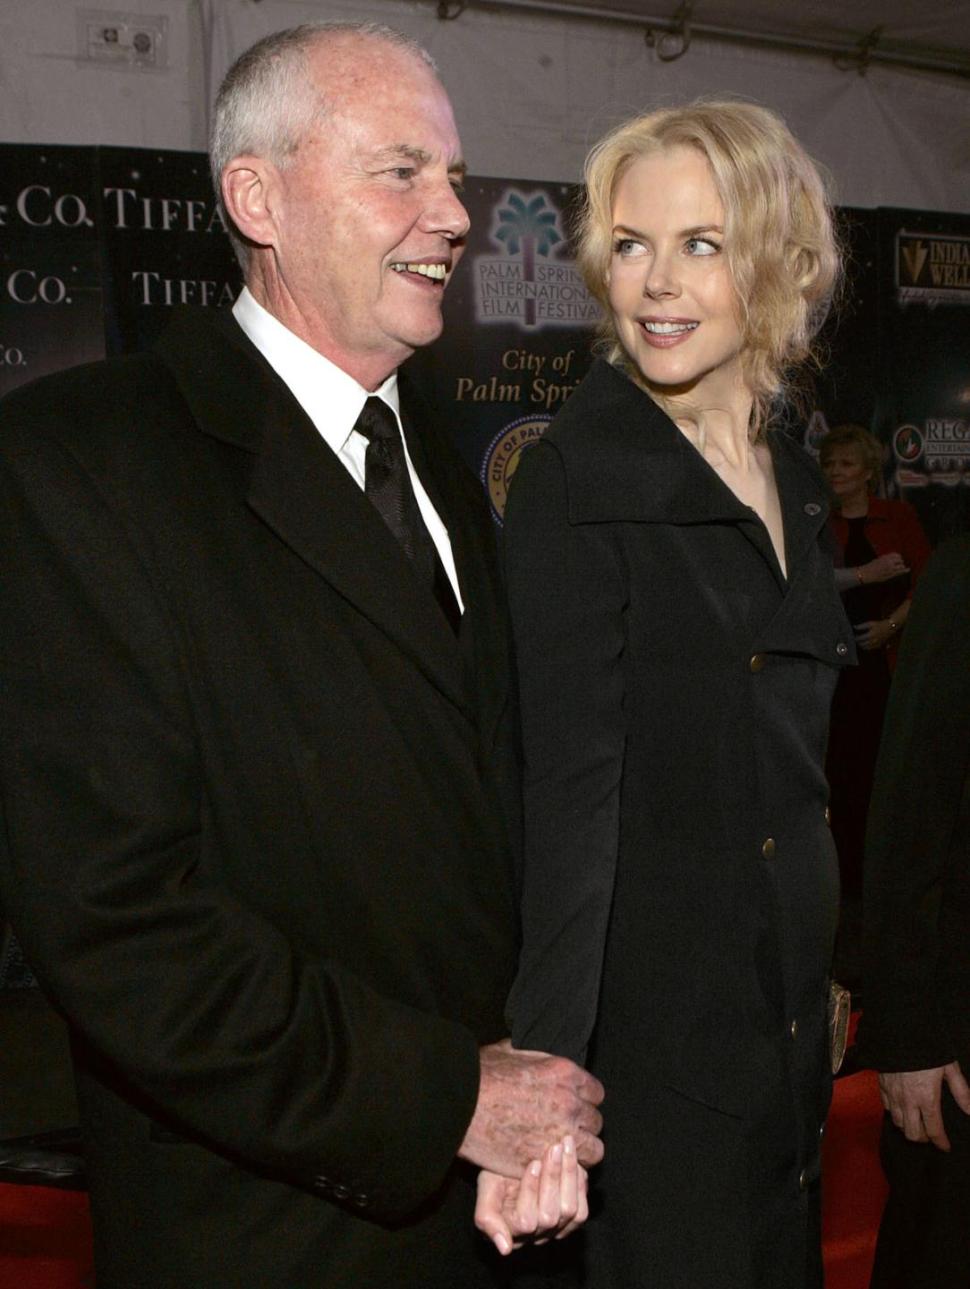 Nicole Kidman and her father, Anthony Kidman, arrive at the 2005 Palm Springs International Film Festival on Jan. 8, 2005, in Palm Springs, Calif.